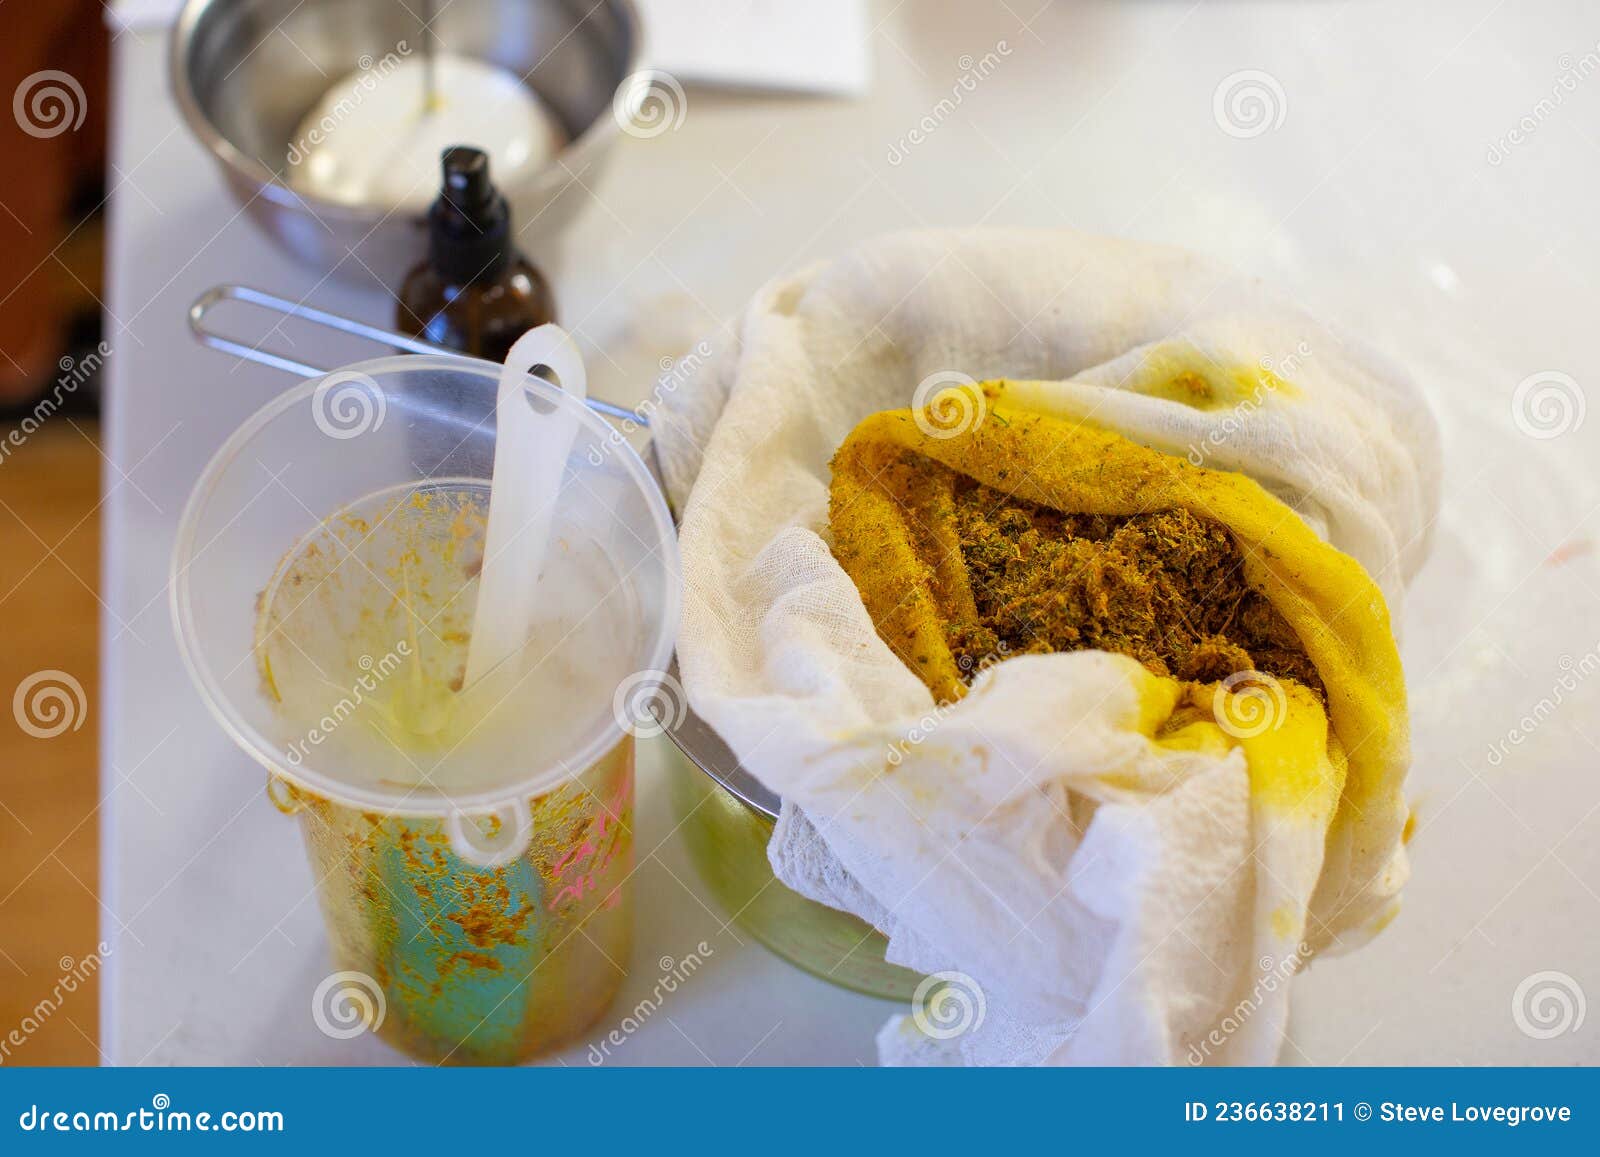 ingredients being used to make homemade remedial skin care salves and lotions